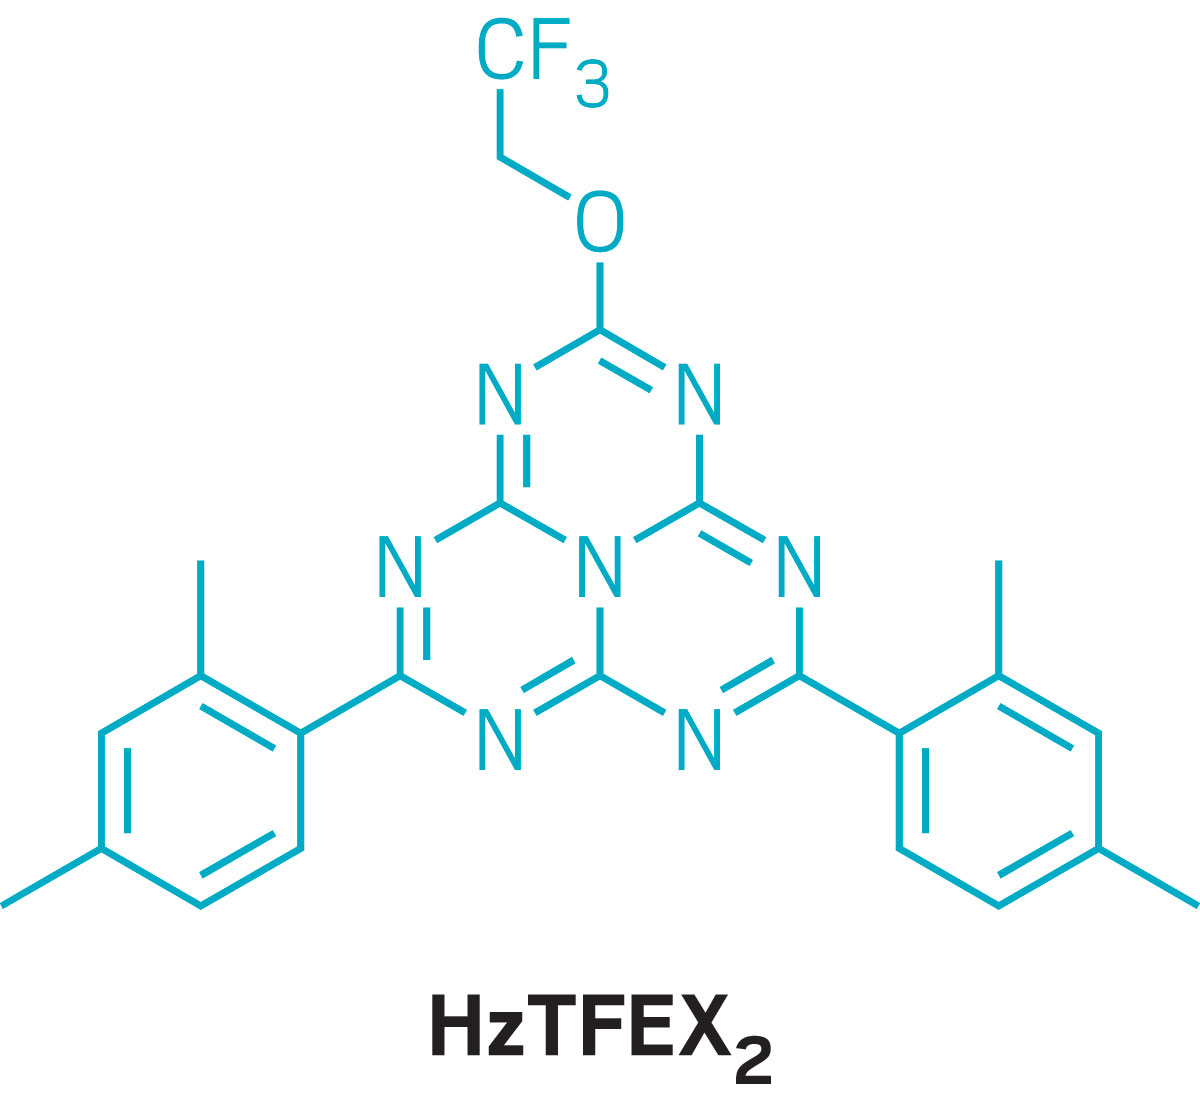 The molecular structure of a heptazine analogue called HzTFEX2. The core is three fused six-membered rings that contain seven nitrogen atoms. This makes a triangle-shaped molecule with a trifluoromethyl ether at the top point and a dimethylbenzene moiety at each of the bottom two points.